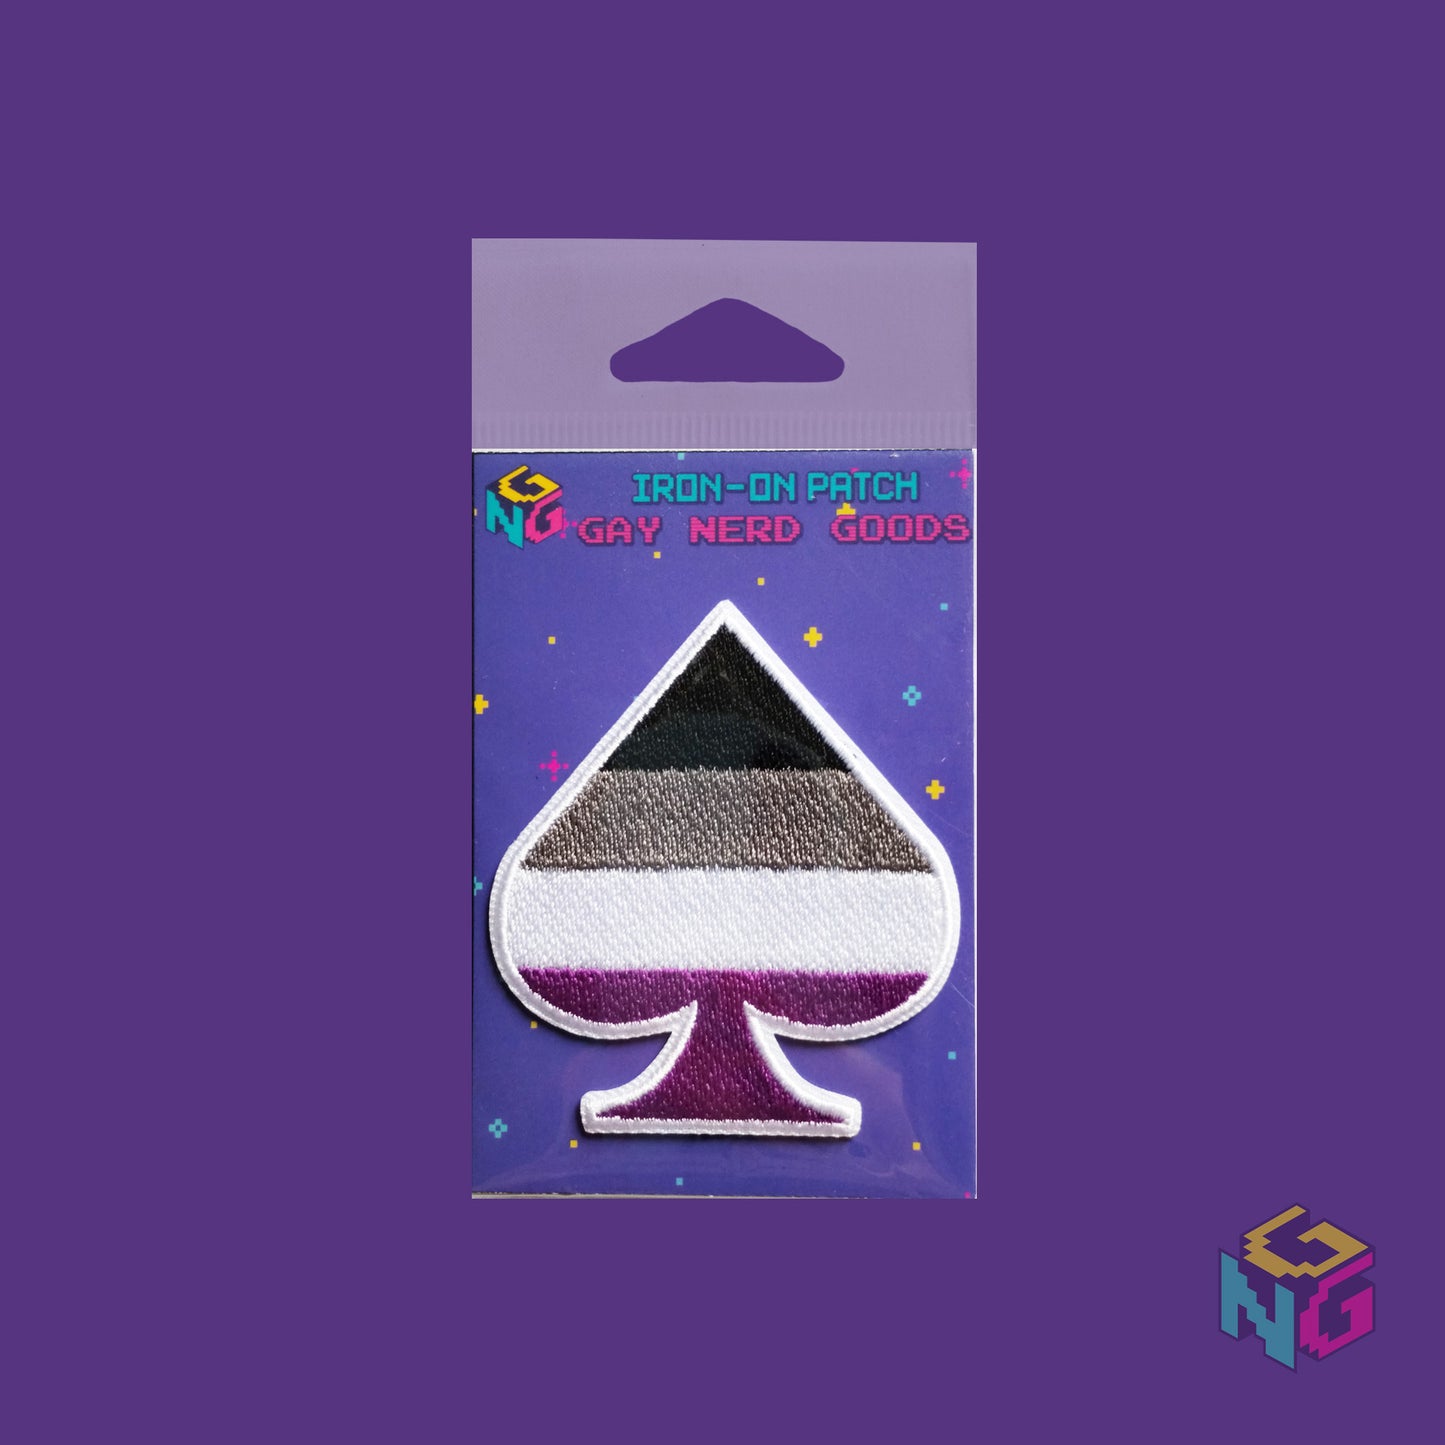 asexual iron on patch in its packaging against purple background